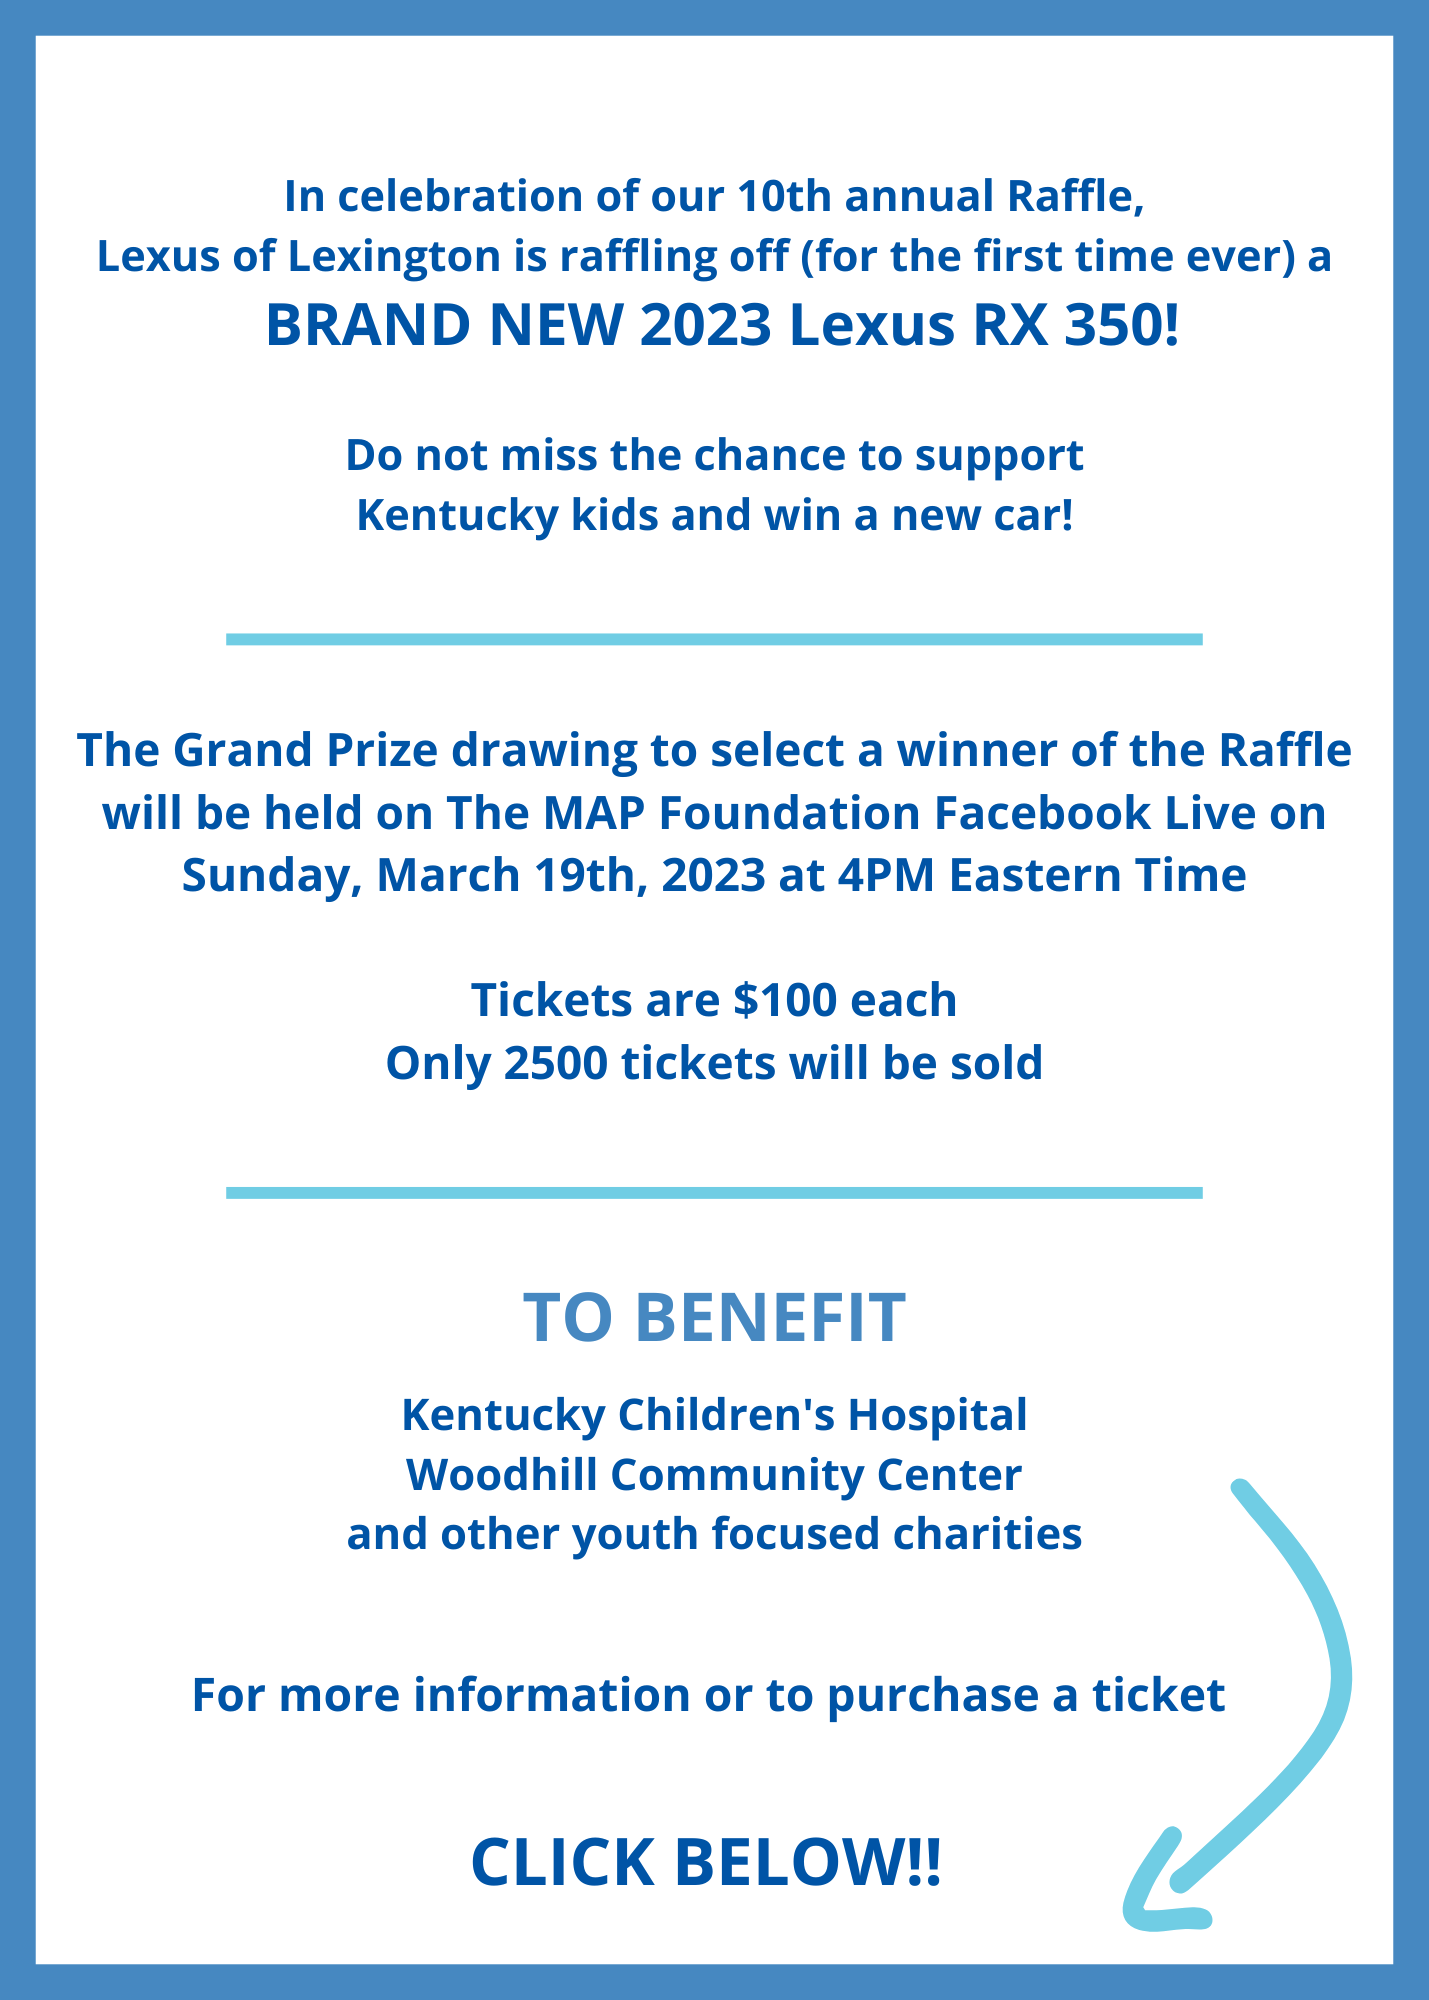 In celebration of our 10th annual raffle, Lexus of Lexington is raffling off (for the first time ever) a brand new 2023 Lexus RX 350. The grand prize drawing to select a winner of the Raffle will be heldf on The MAP Foundation Facebook Live on Sunday, March 19th, 2023 at 4pm Eastern Time. Tickets are $100 each, only 2500 tickets will be sold.